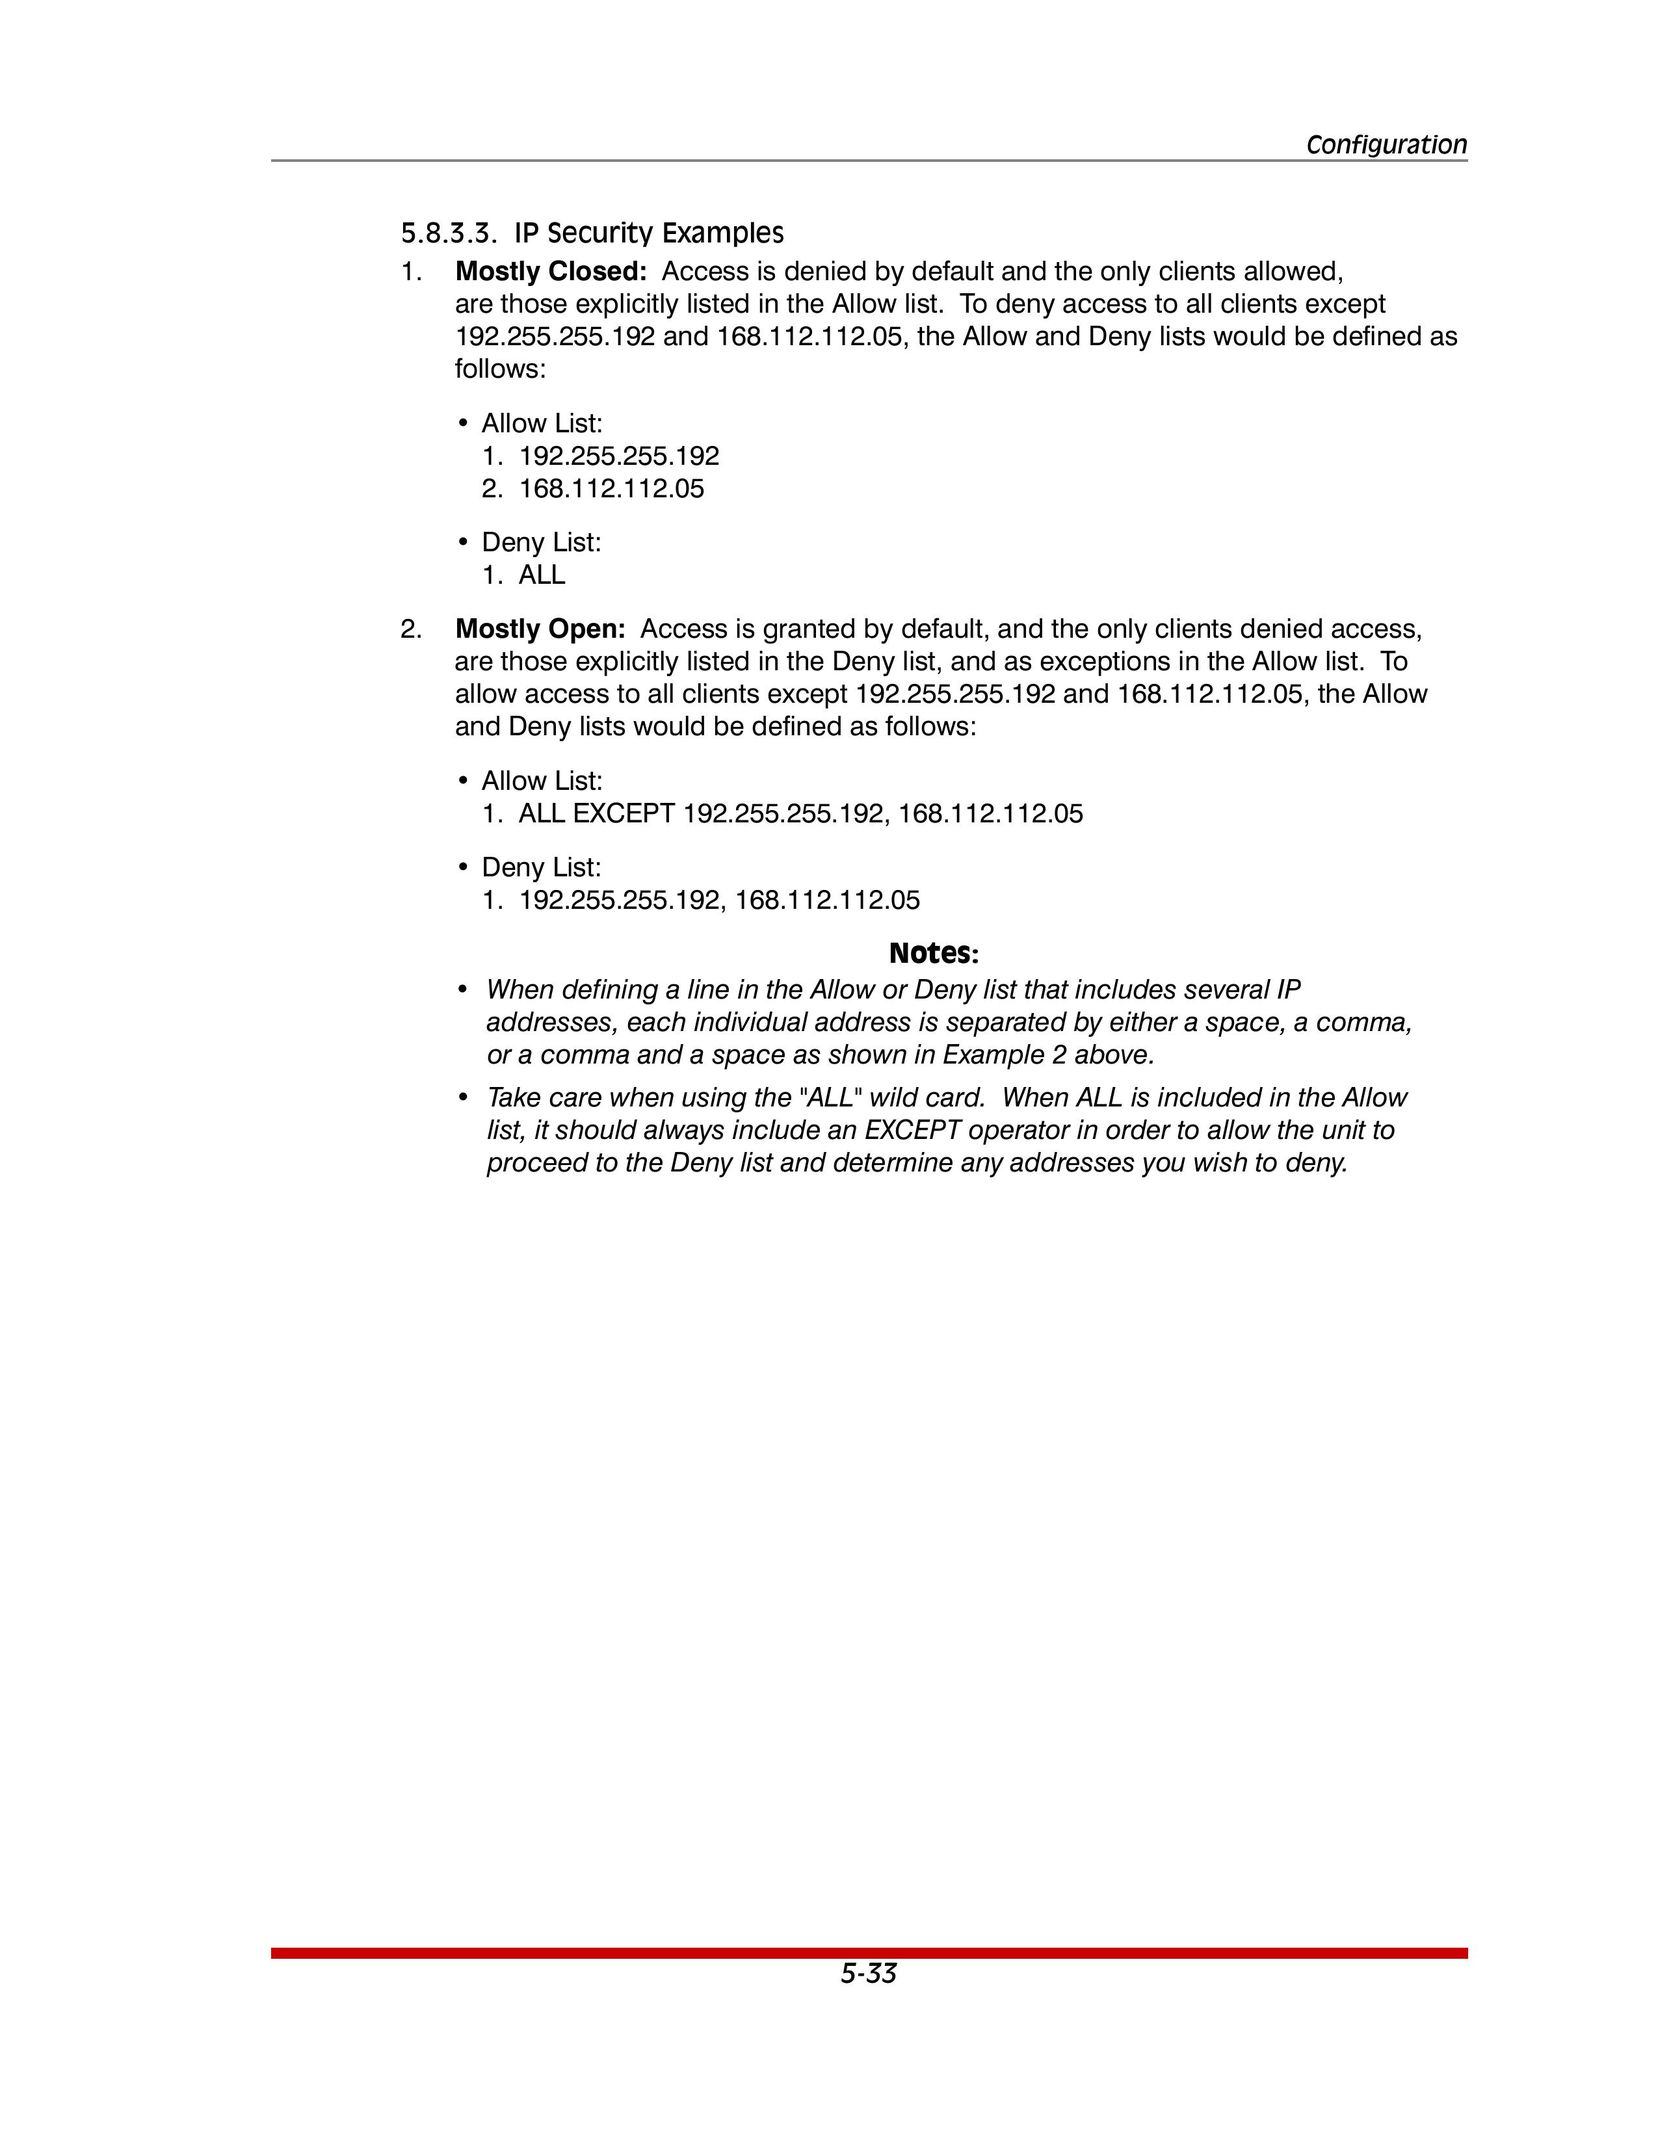 Western Telematic RSM-8 Video Gaming Accessories User Manual (Page 52)